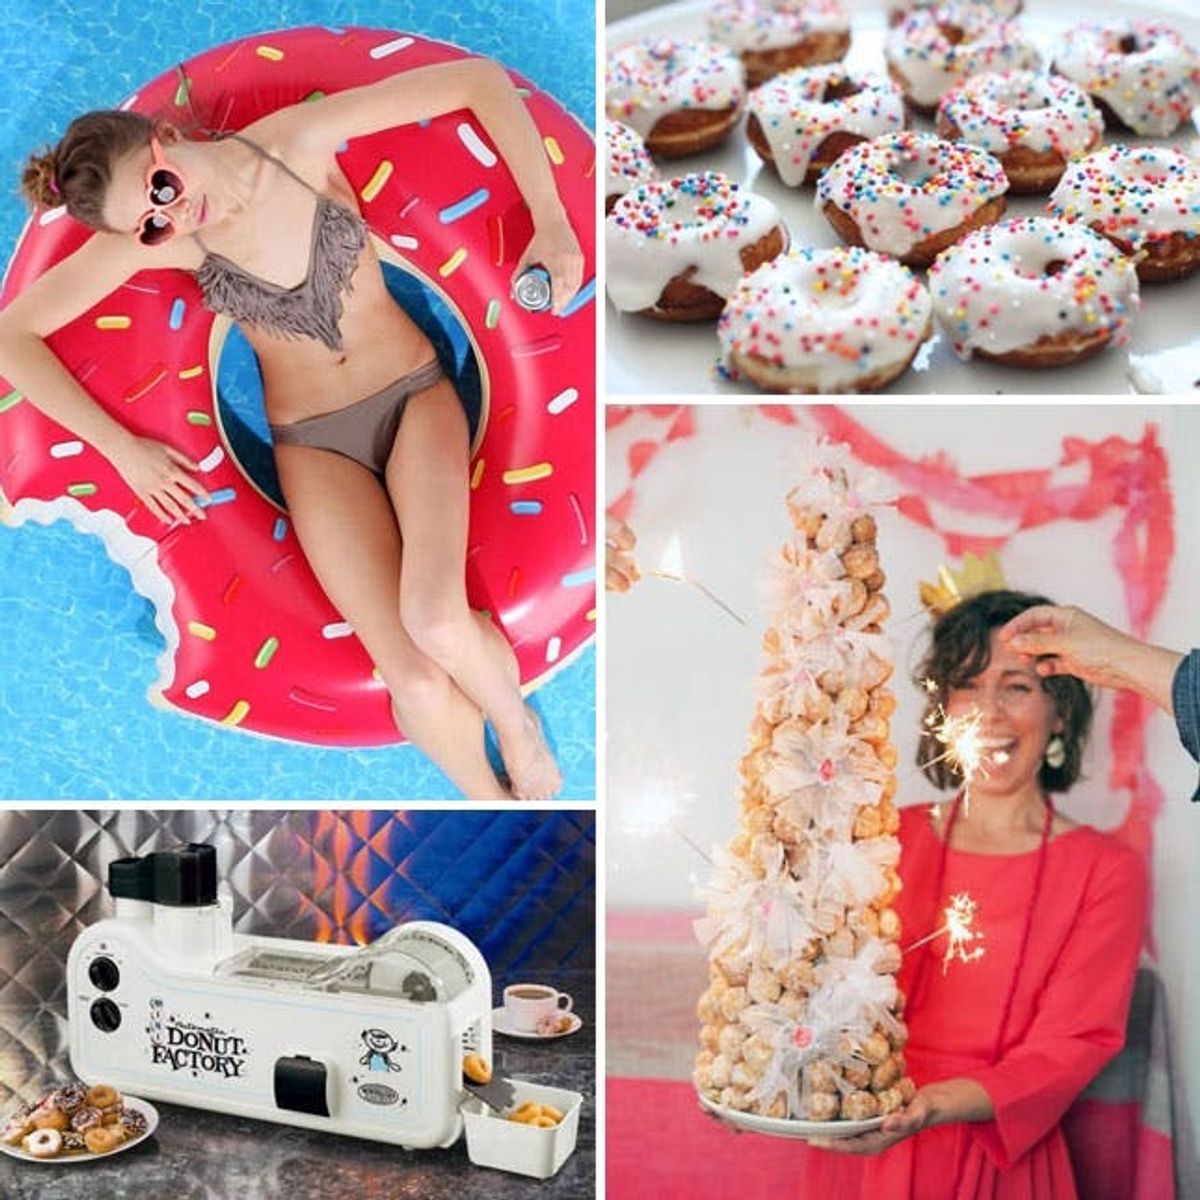 22 Ways to Go Nuts for Donuts!